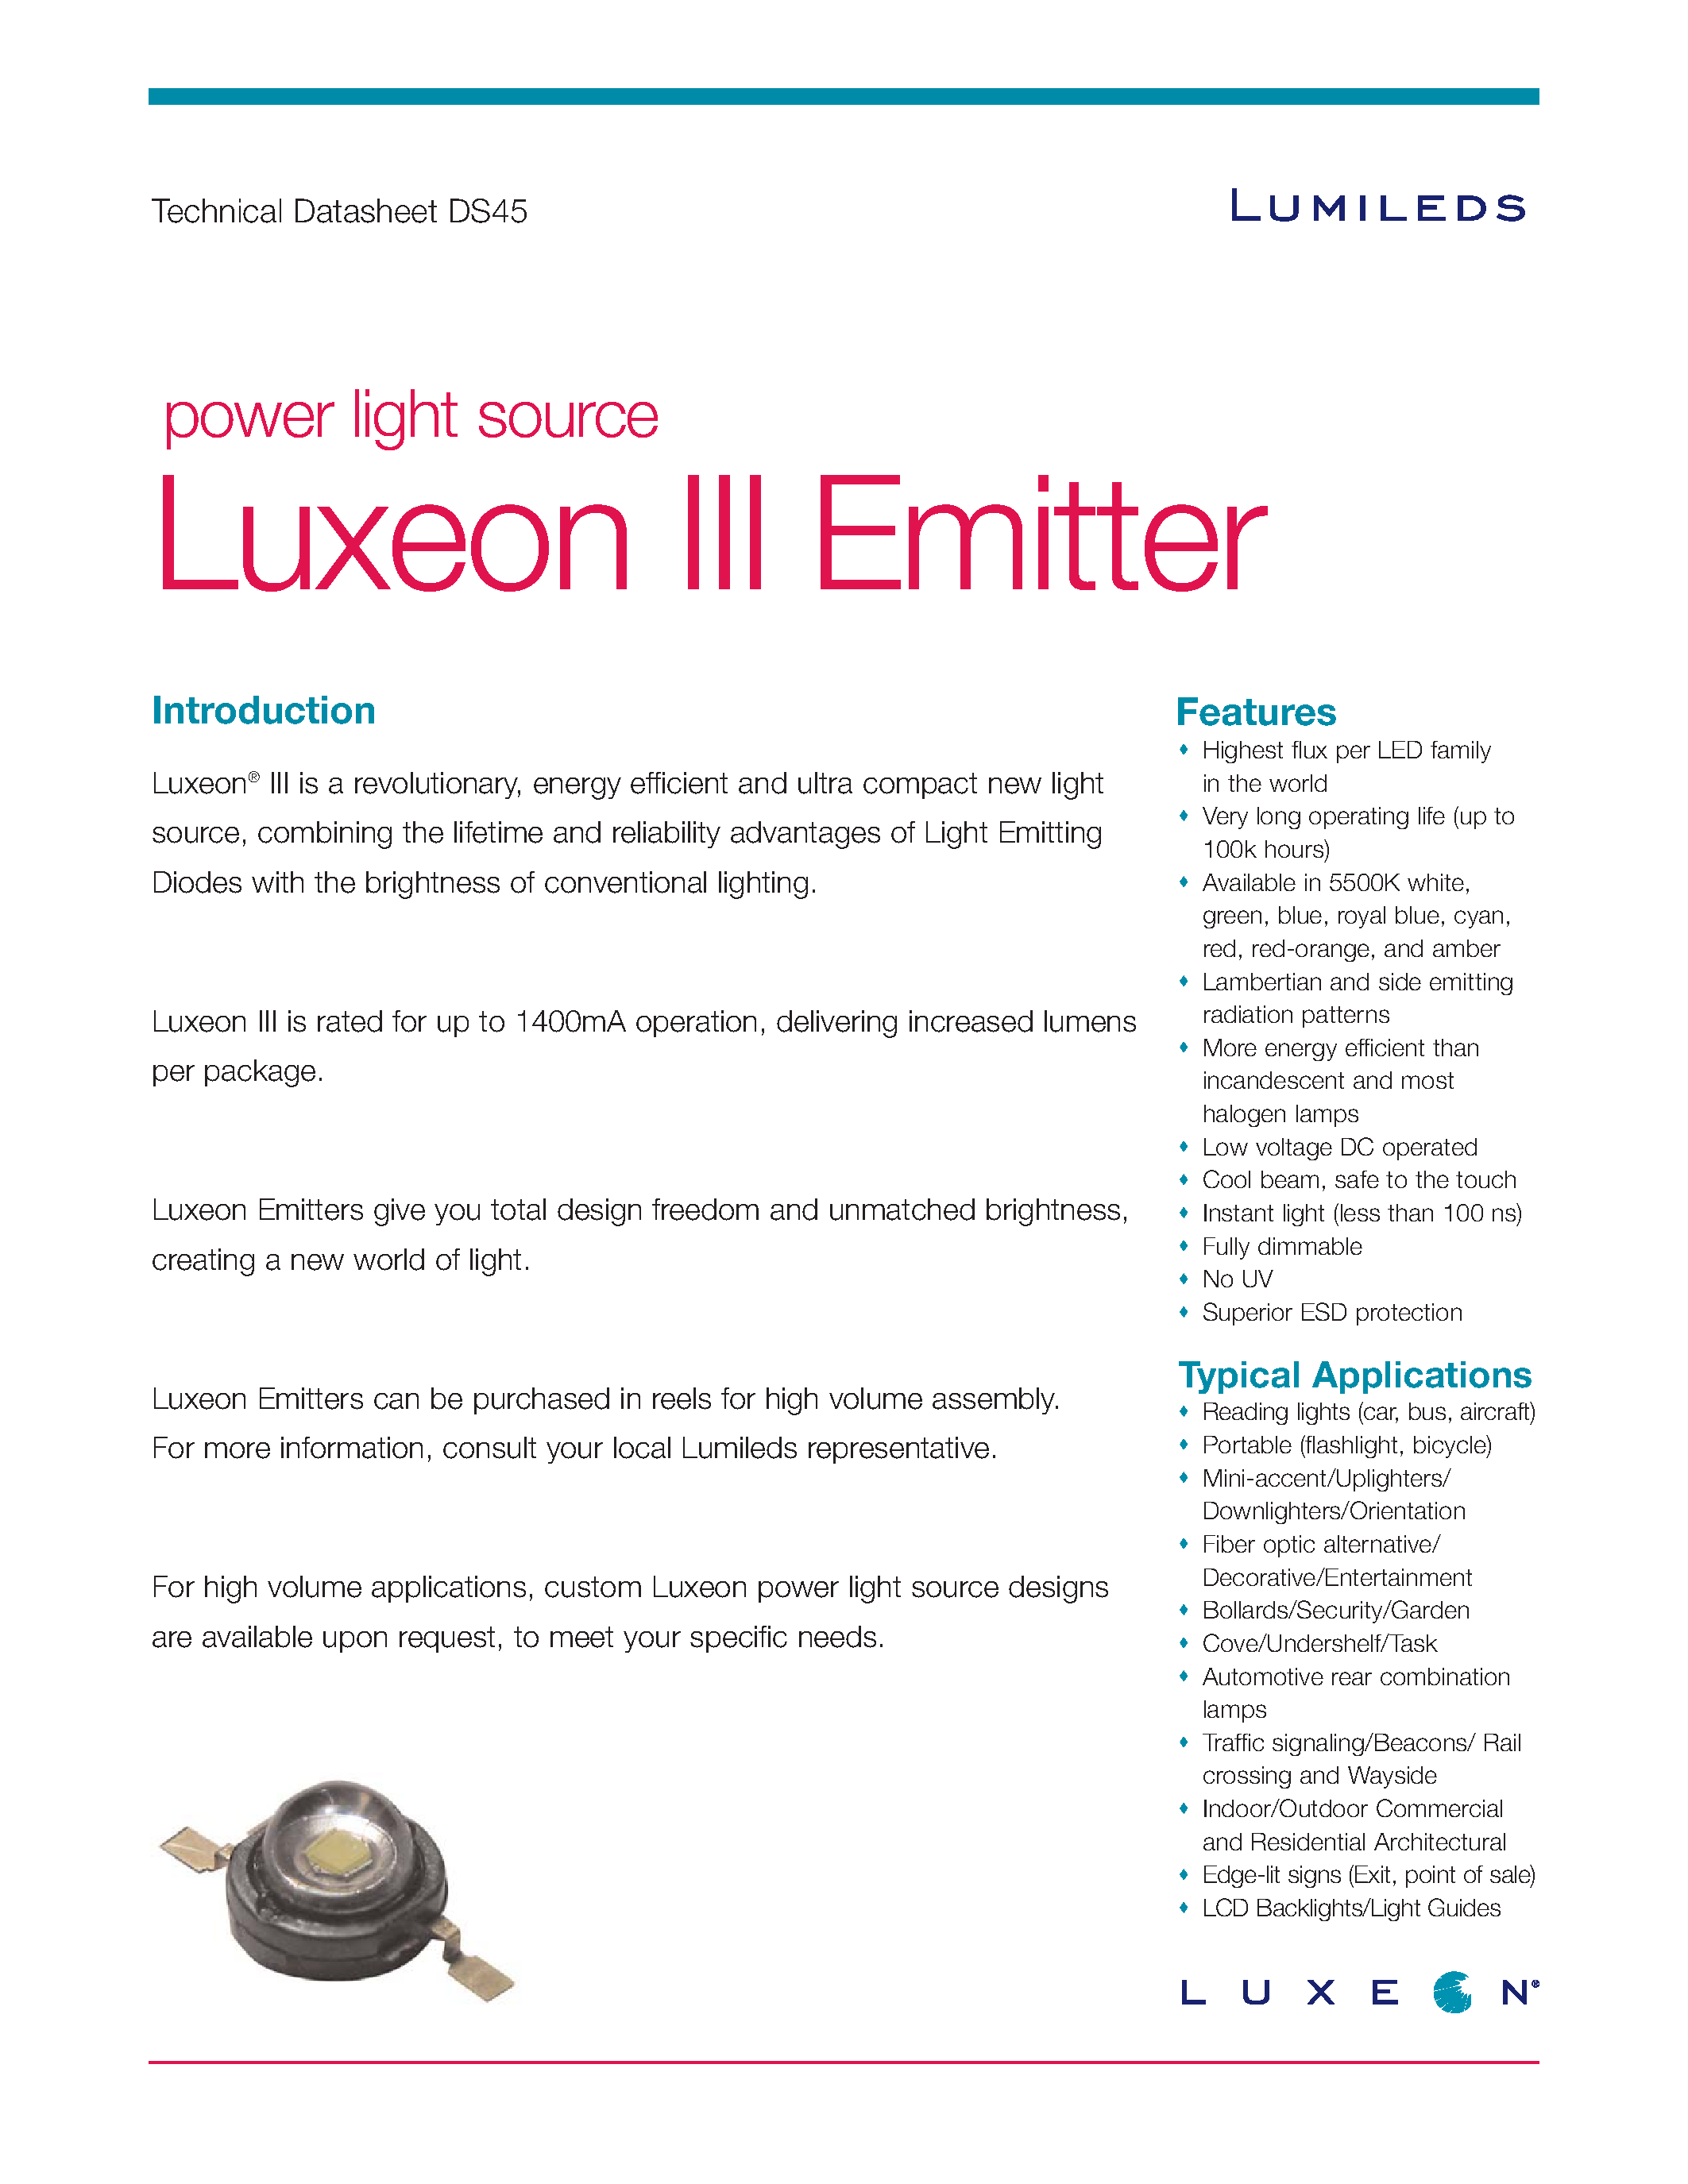 Даташит LXHL-DB09-(LXHL-xxxx) Combining the lifetime and reliability Advantages of Light Emitting Diodes страница 1